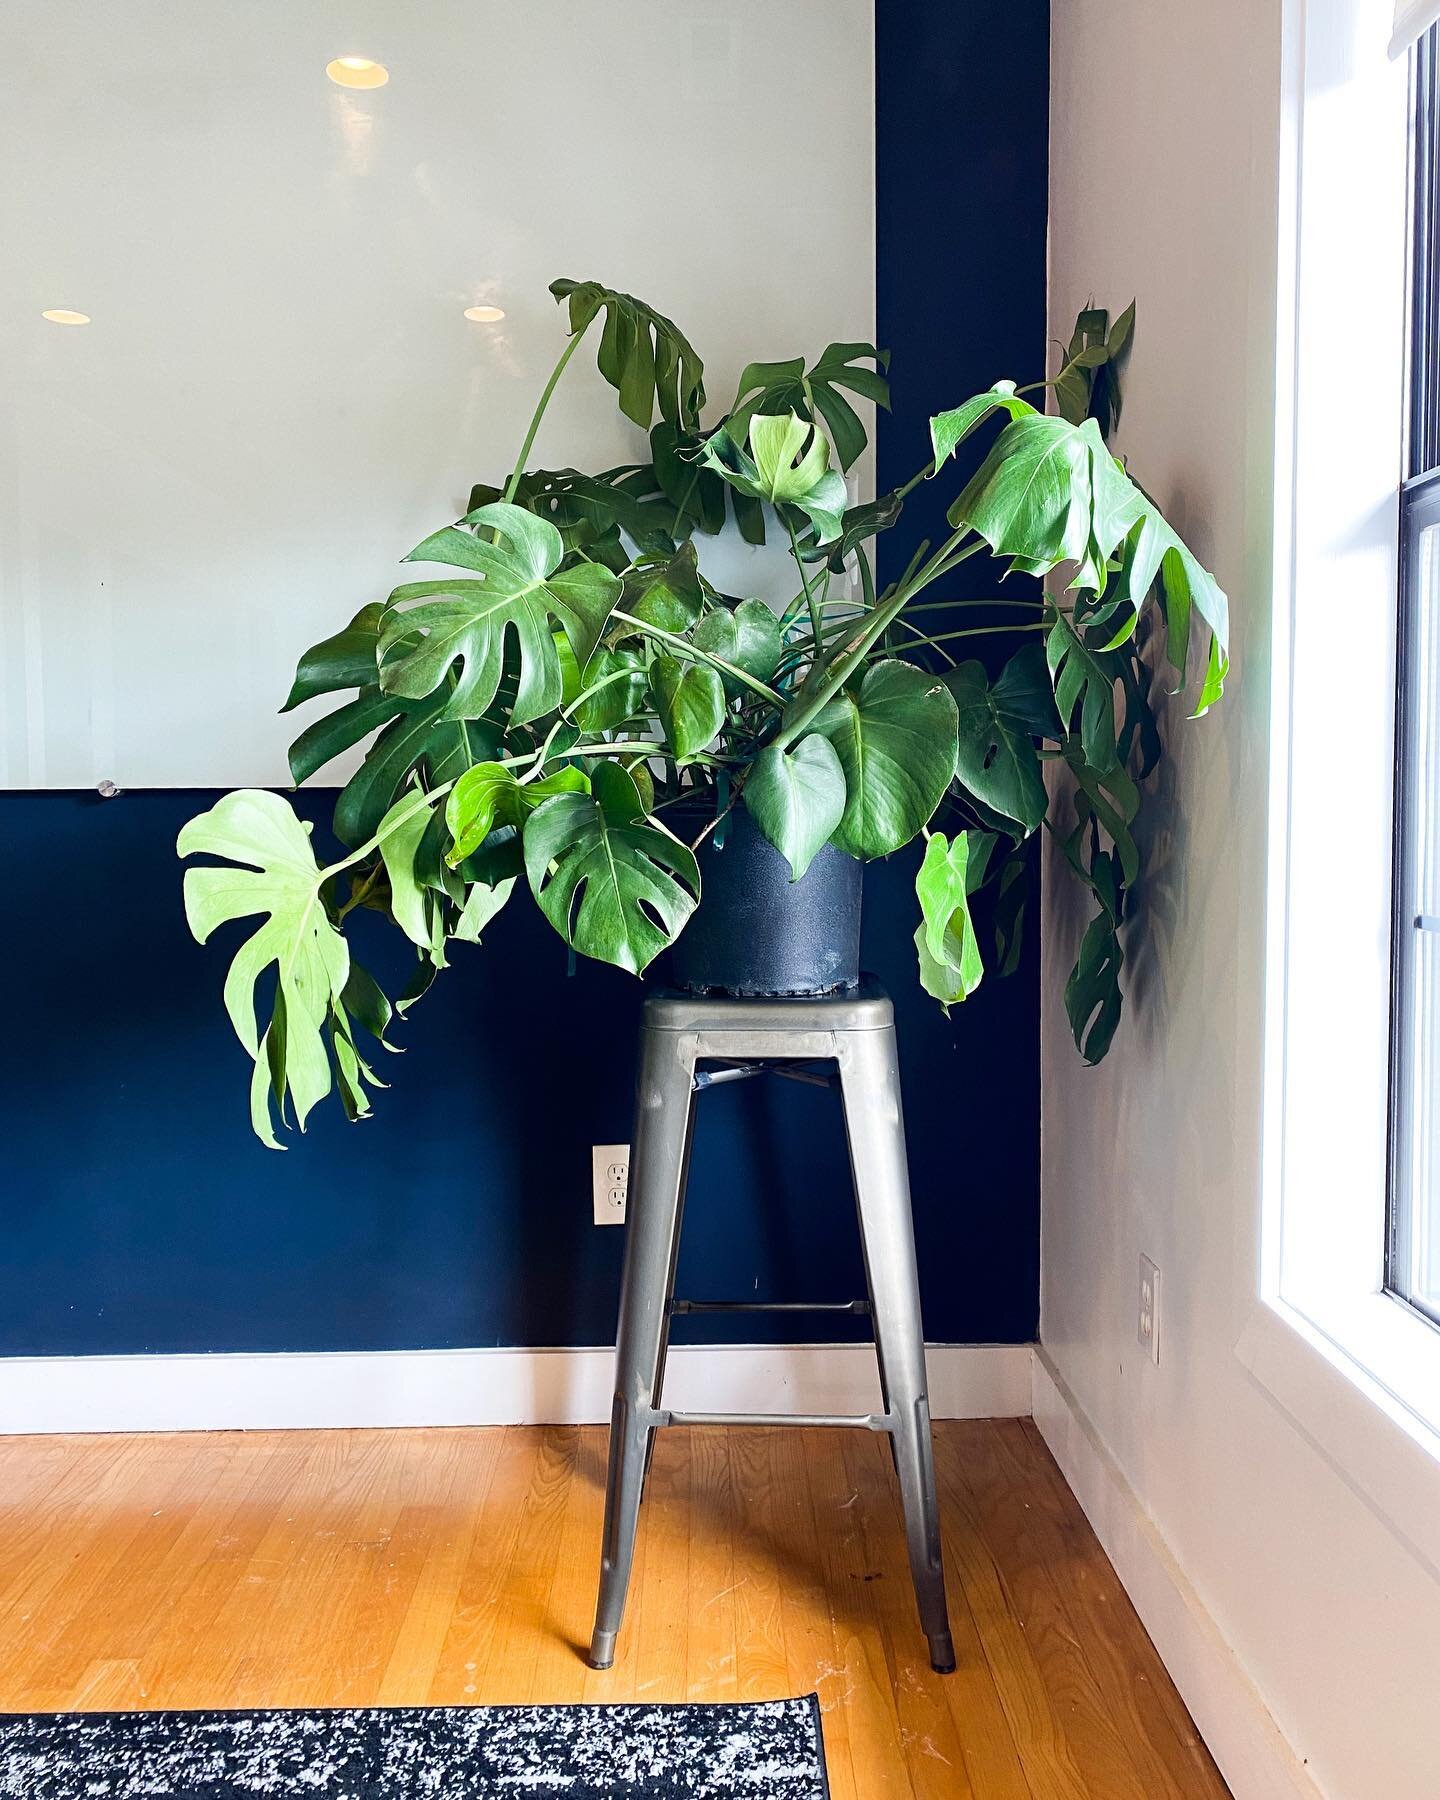 Have we told you lately that we like plants?  We&rsquo;ve been slowly adding plants to our workspace to make it *just that much better*. Because, who doesn&rsquo;t like working next to plants?!?
This Monstera is our latest addition to The Hub communi